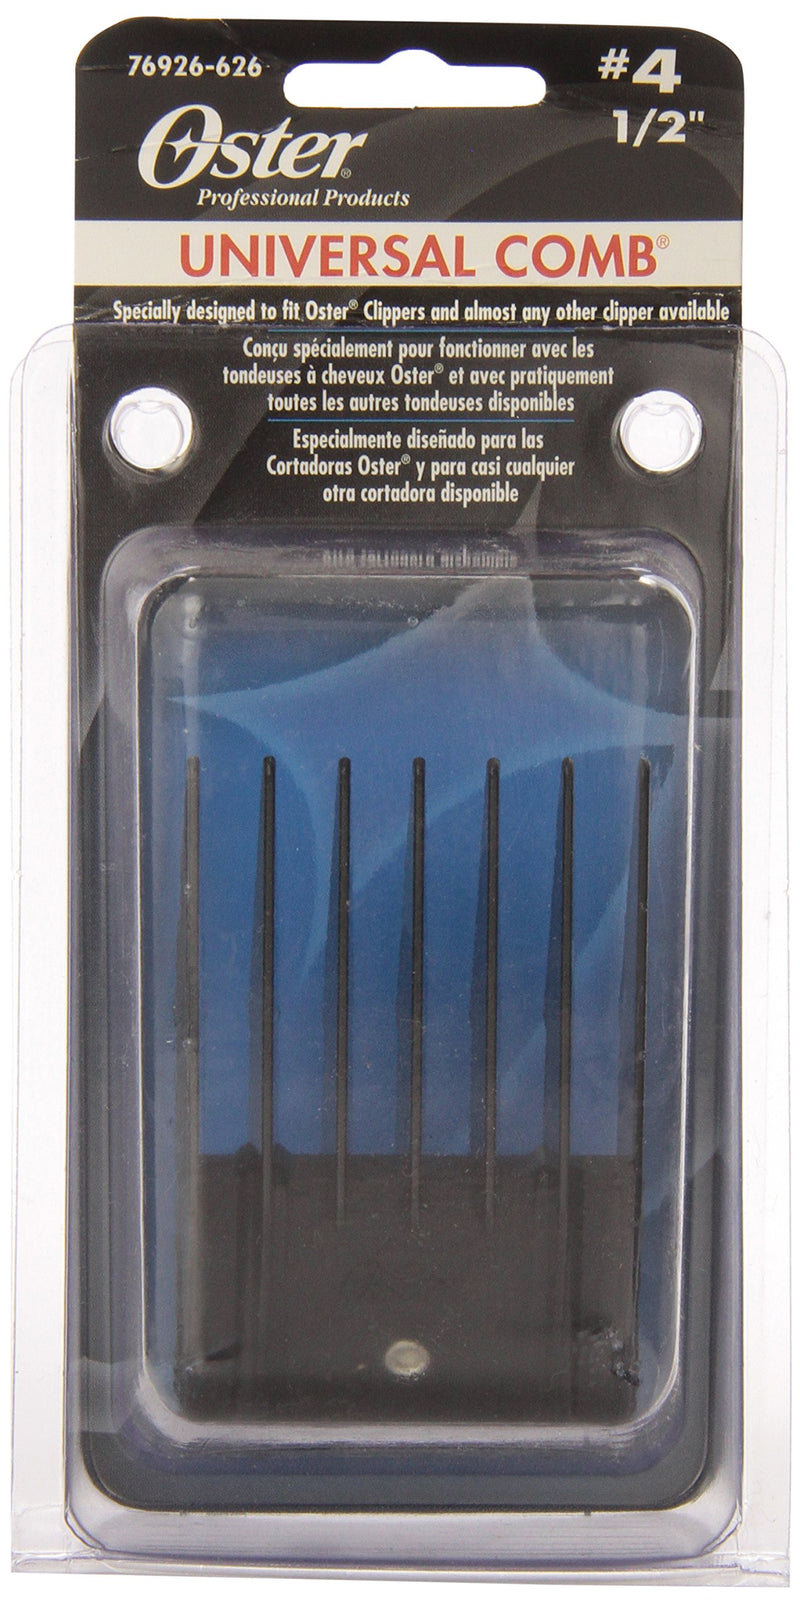 [Australia] - Oster Universal Comb Attachment Blade Guard, Size # 4 Professional Animal Clippers 